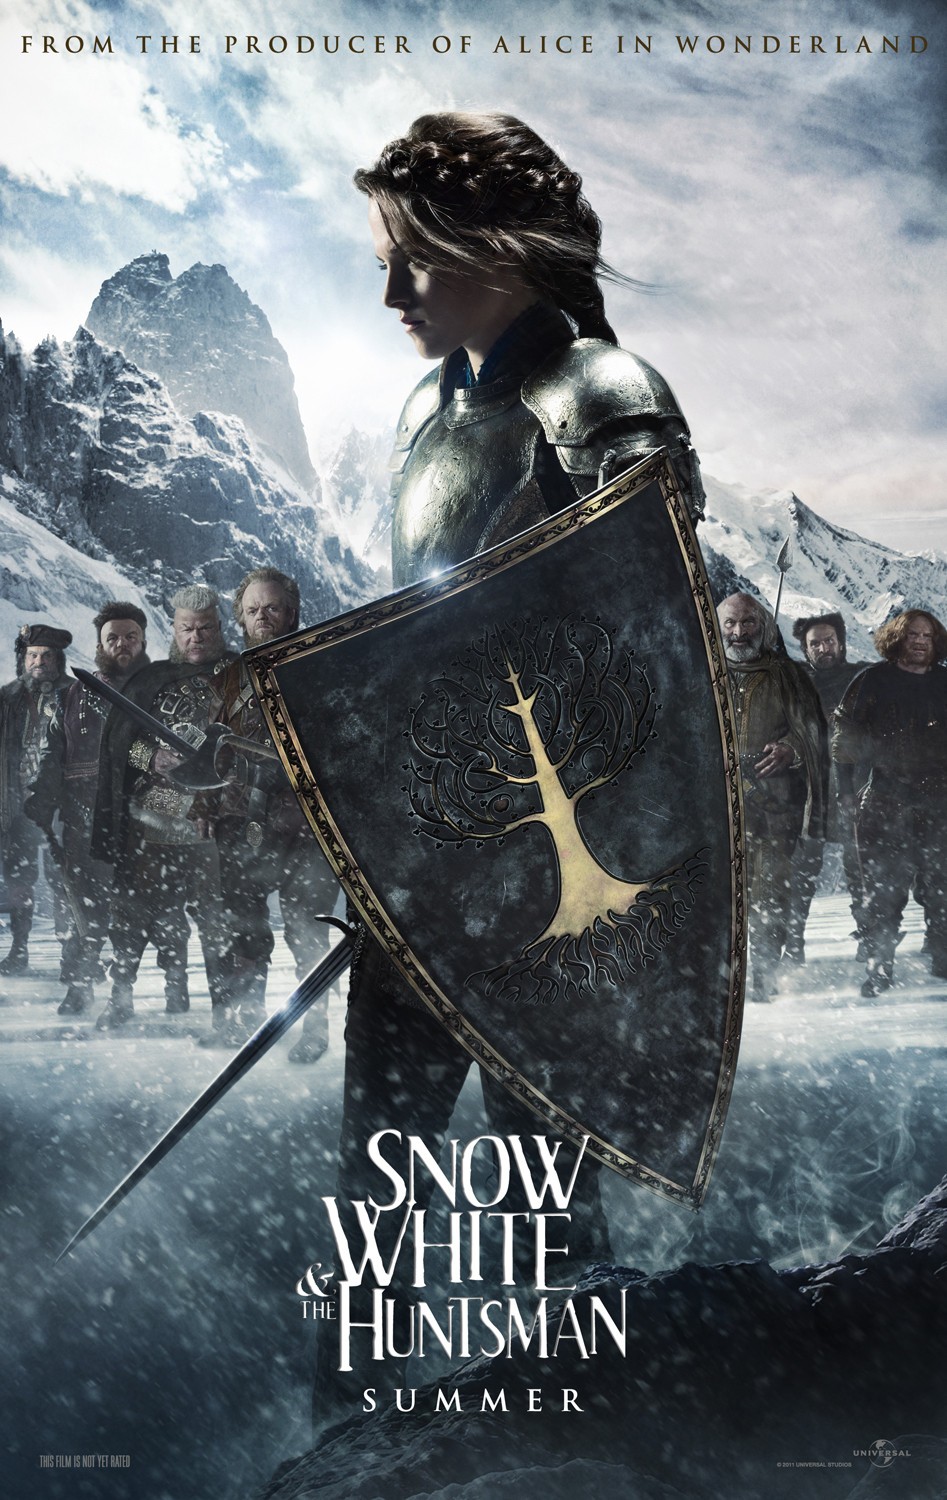 First Posters & Trailer for Snow White and The Huntsman